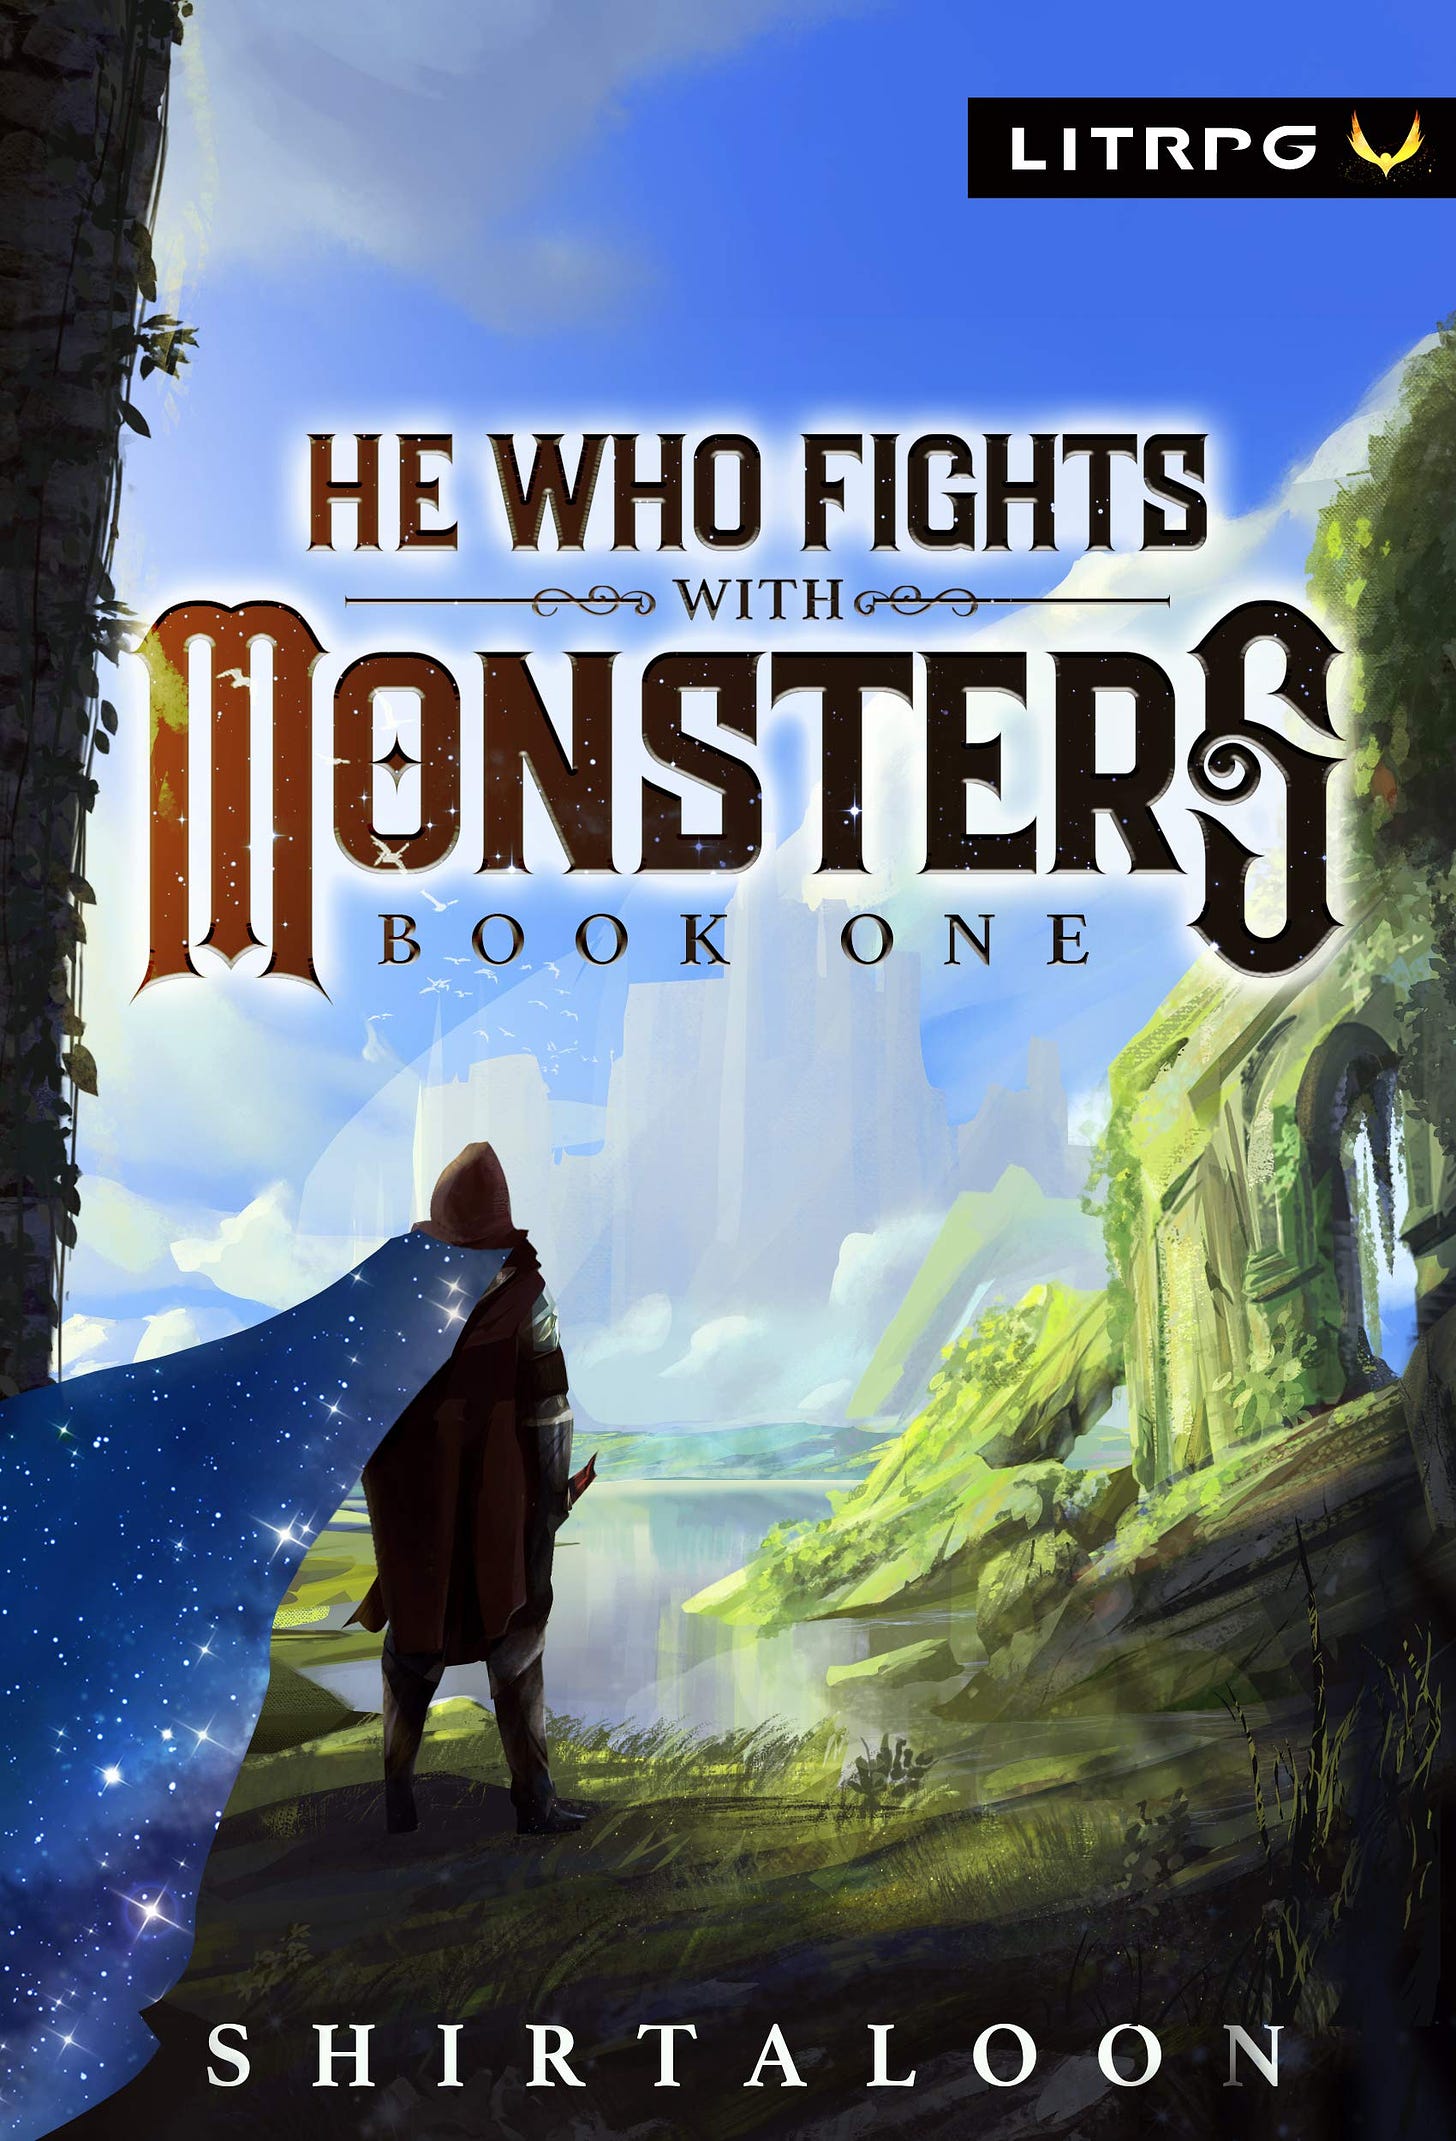 The cover of He Who Fights With monsters Book one by Shirtaloon